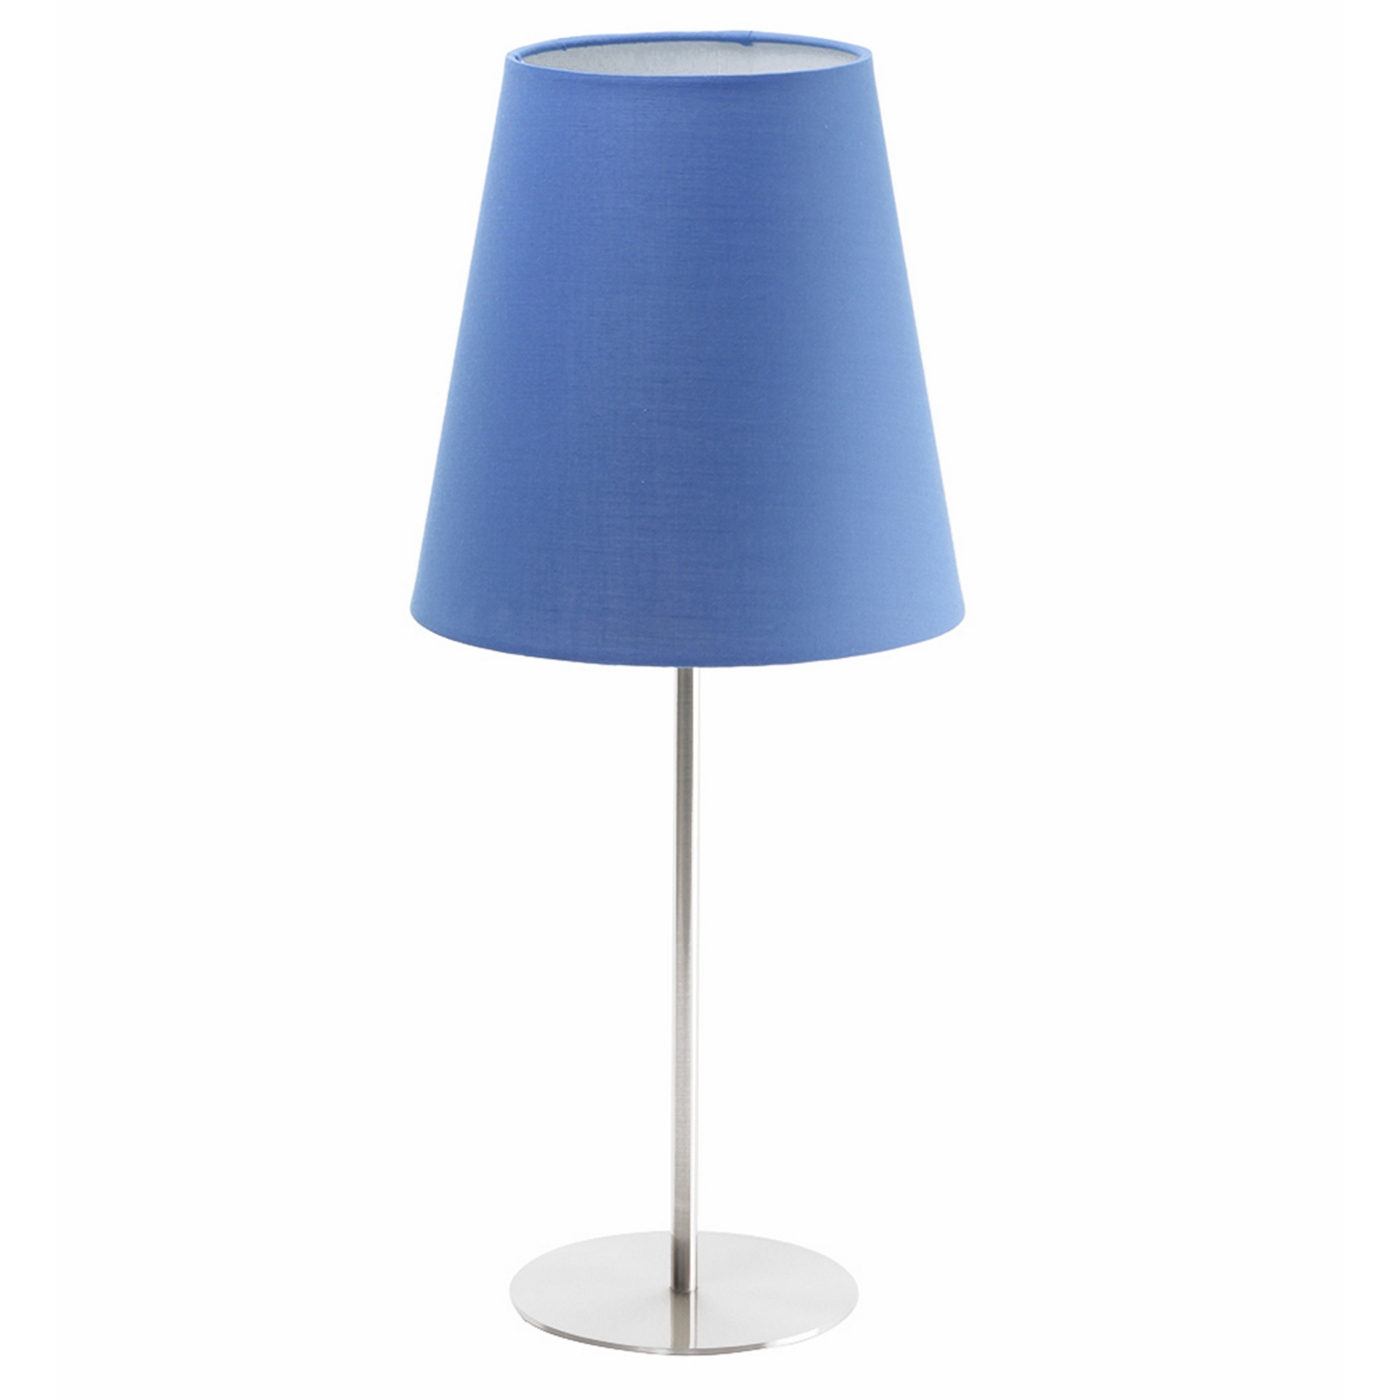 Litecraft Small White Table Lamp with Blue Shade